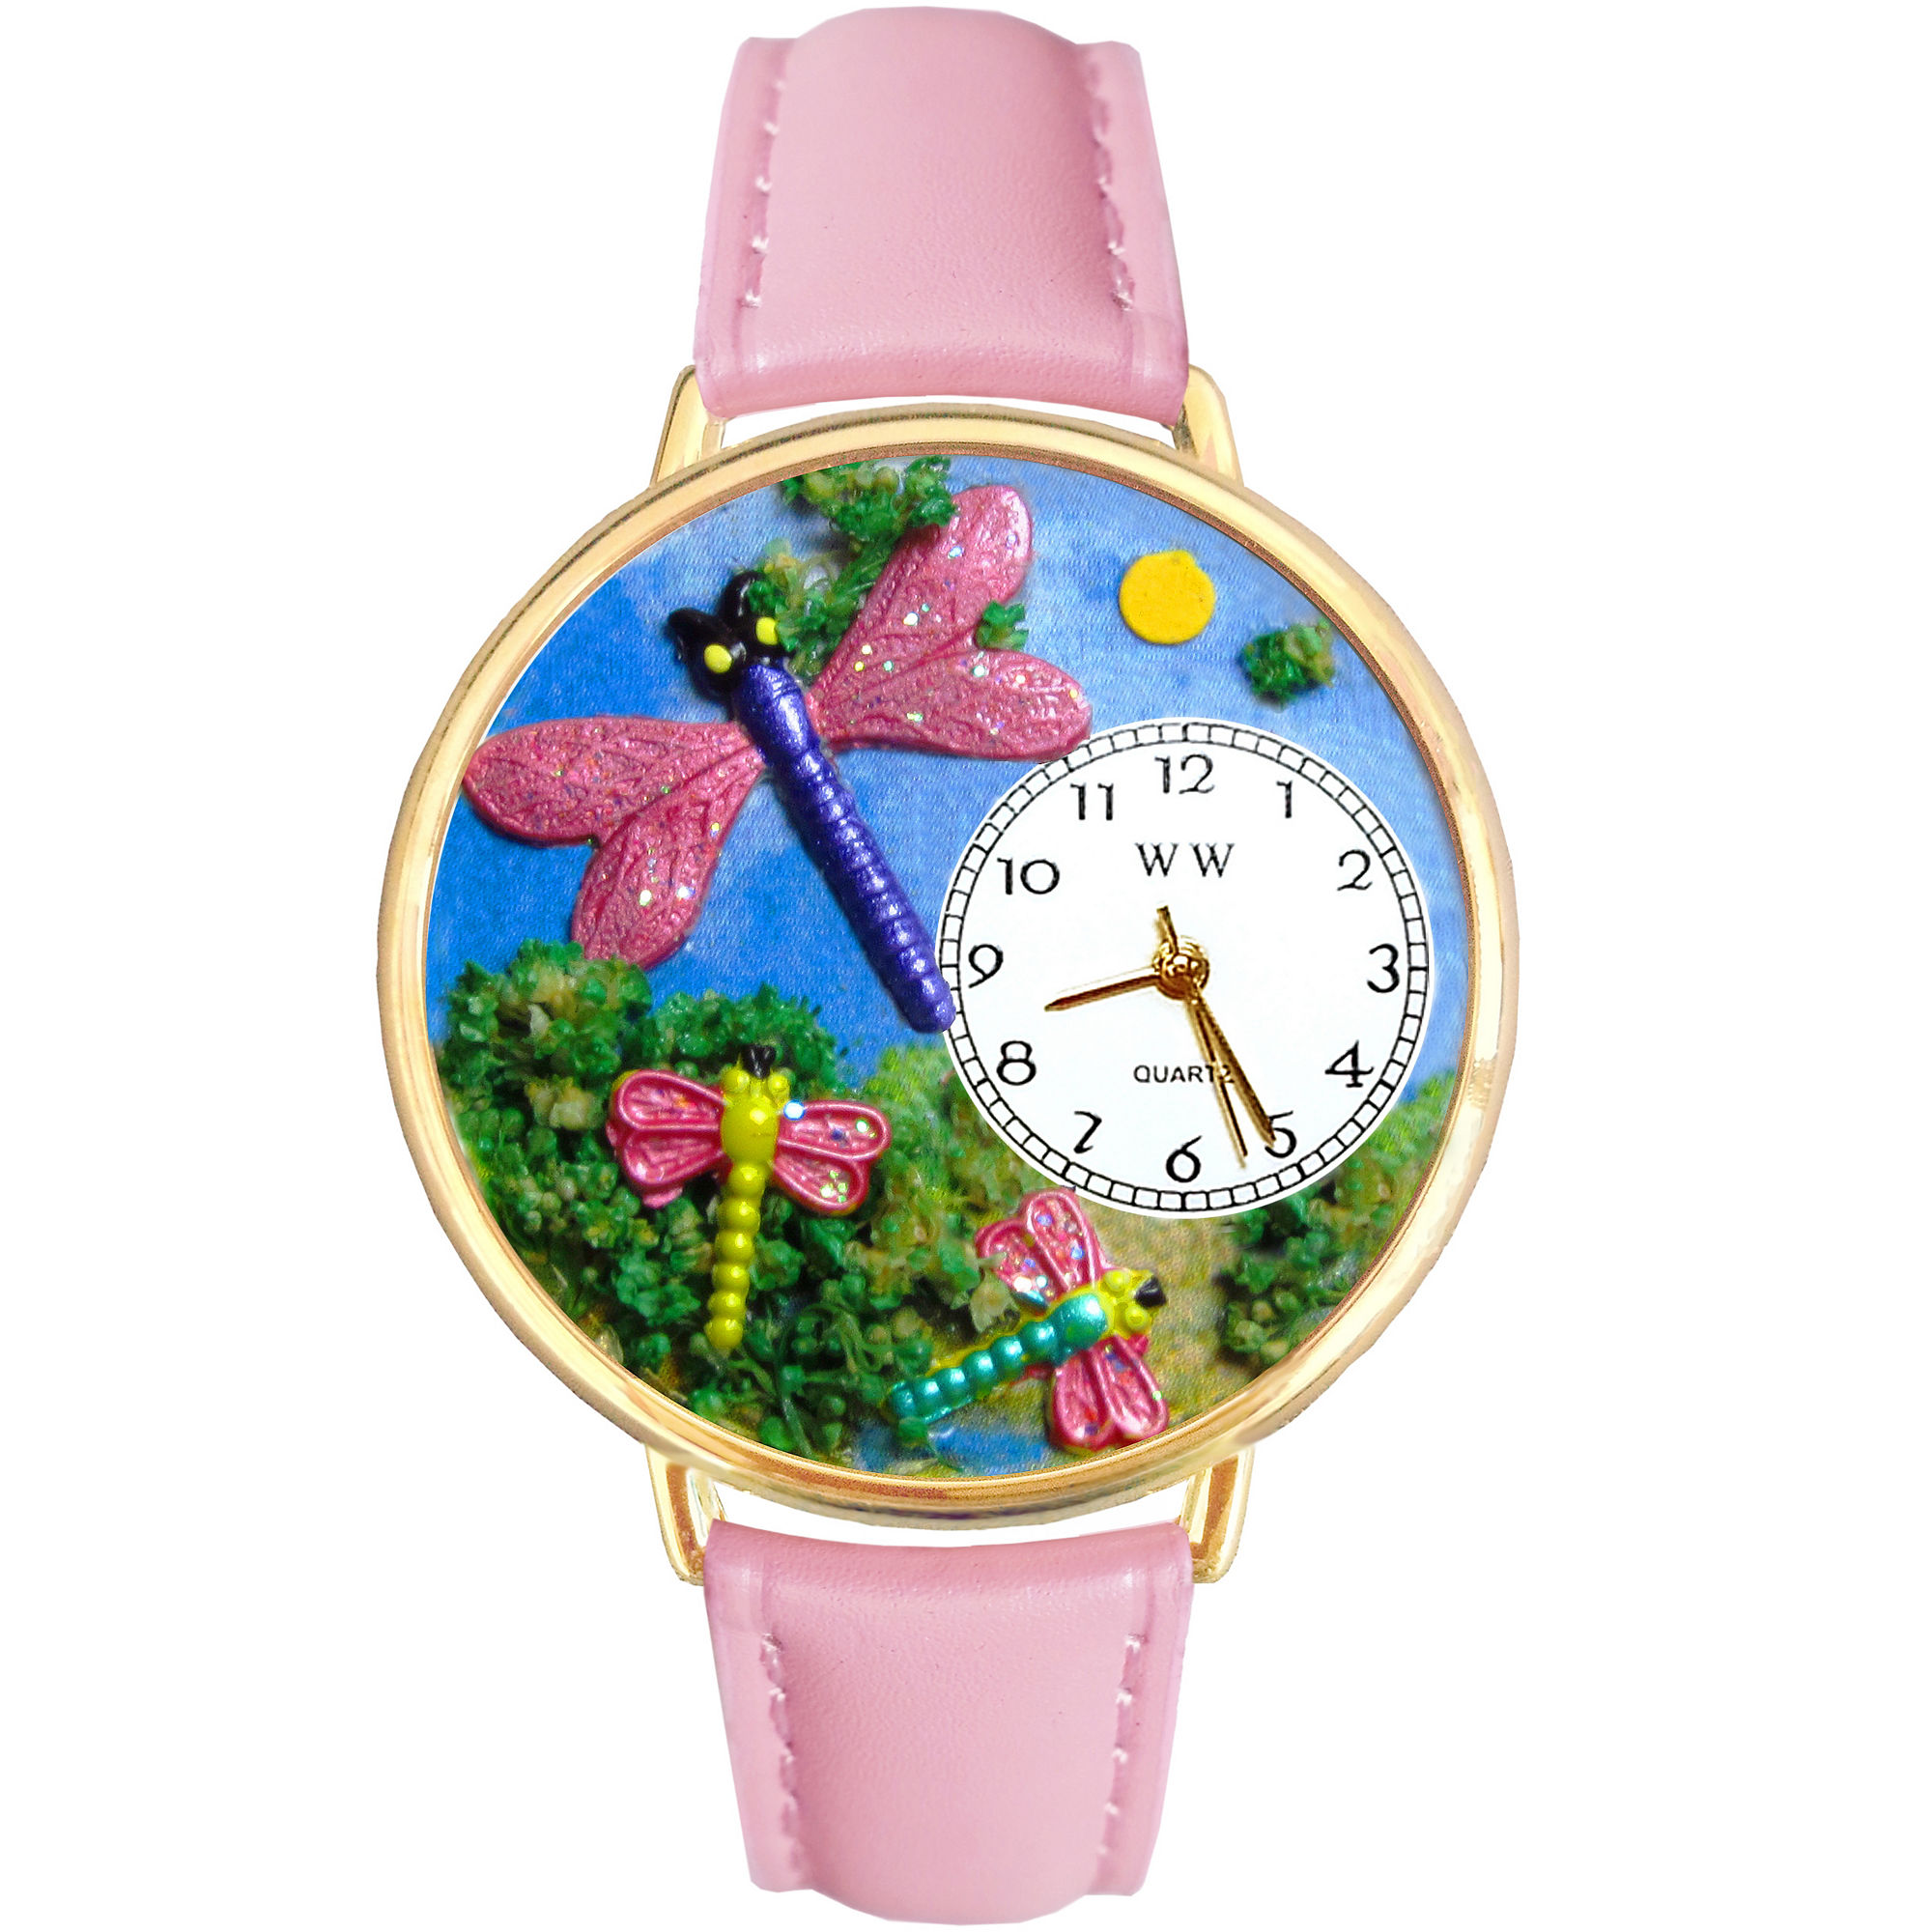 Whimsical Watches Personalized Dragonfly Womens Gold-Tone Bezel Pink Leather Strap Watch